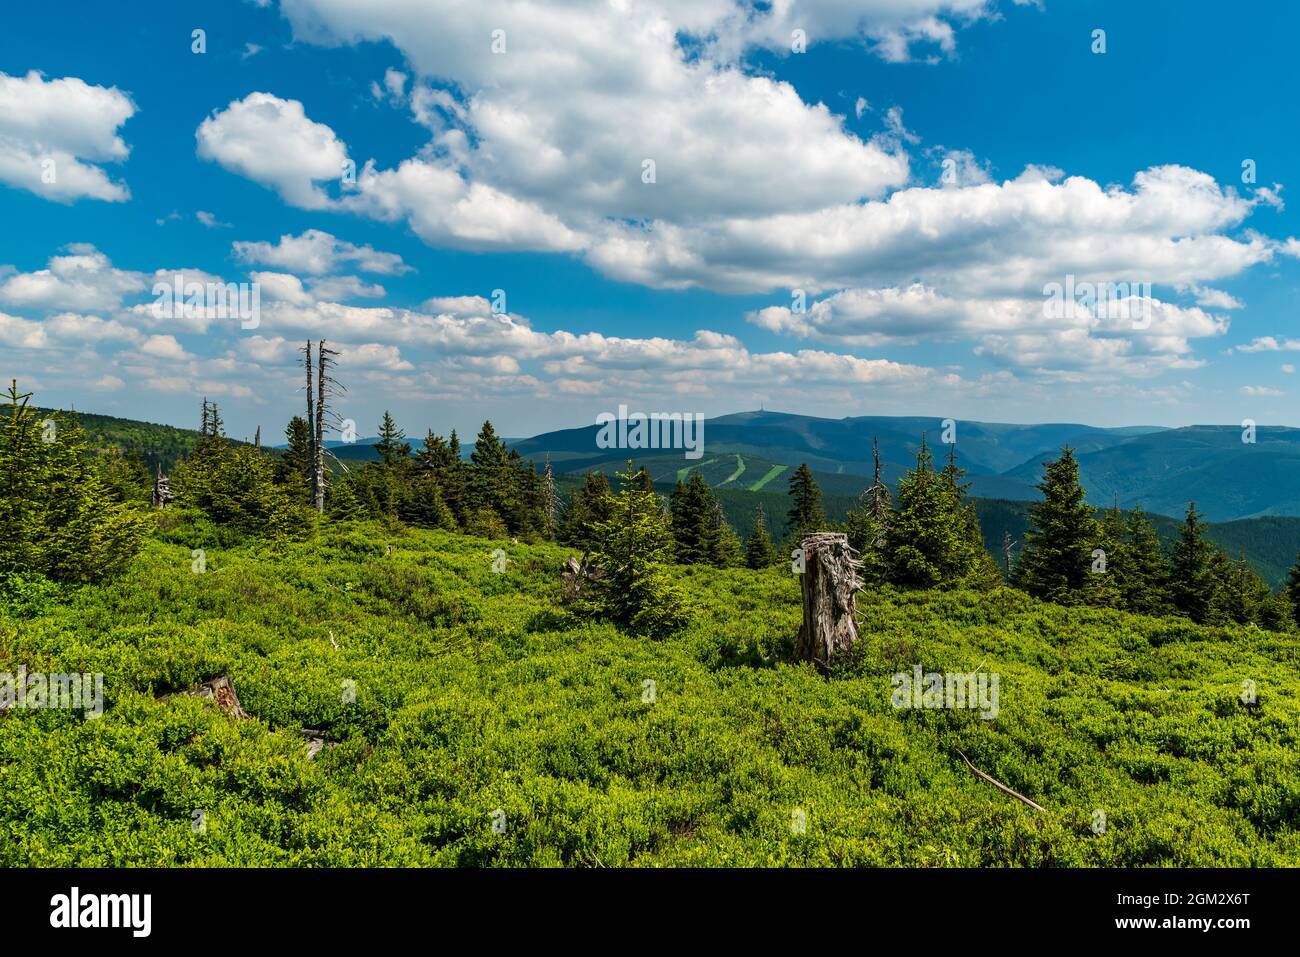 Jeseniky mountains with highest Praded hill from Spaleny vrch hill in Czech republic during beautiful day with blue sky and clouds Stock Photo